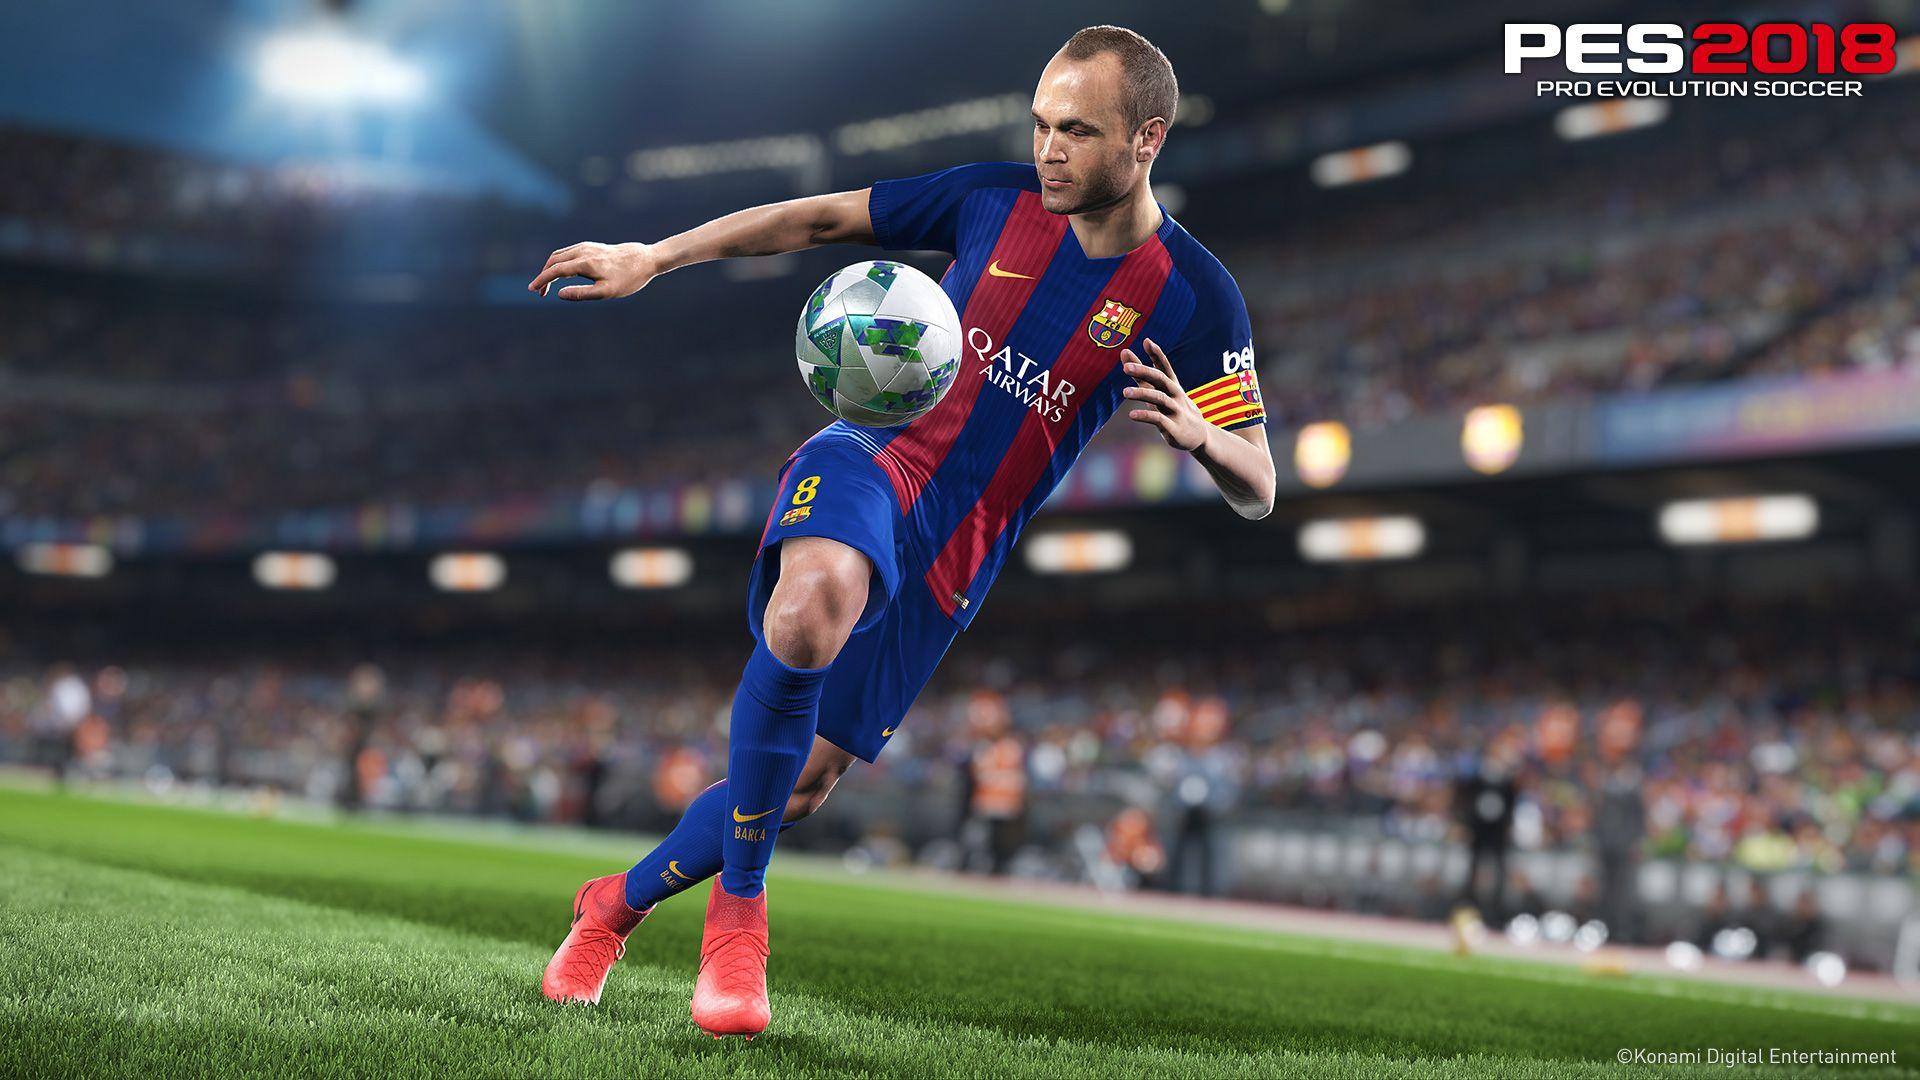 Pro Evolution Soccer 2018' hits PC and consoles September 12th